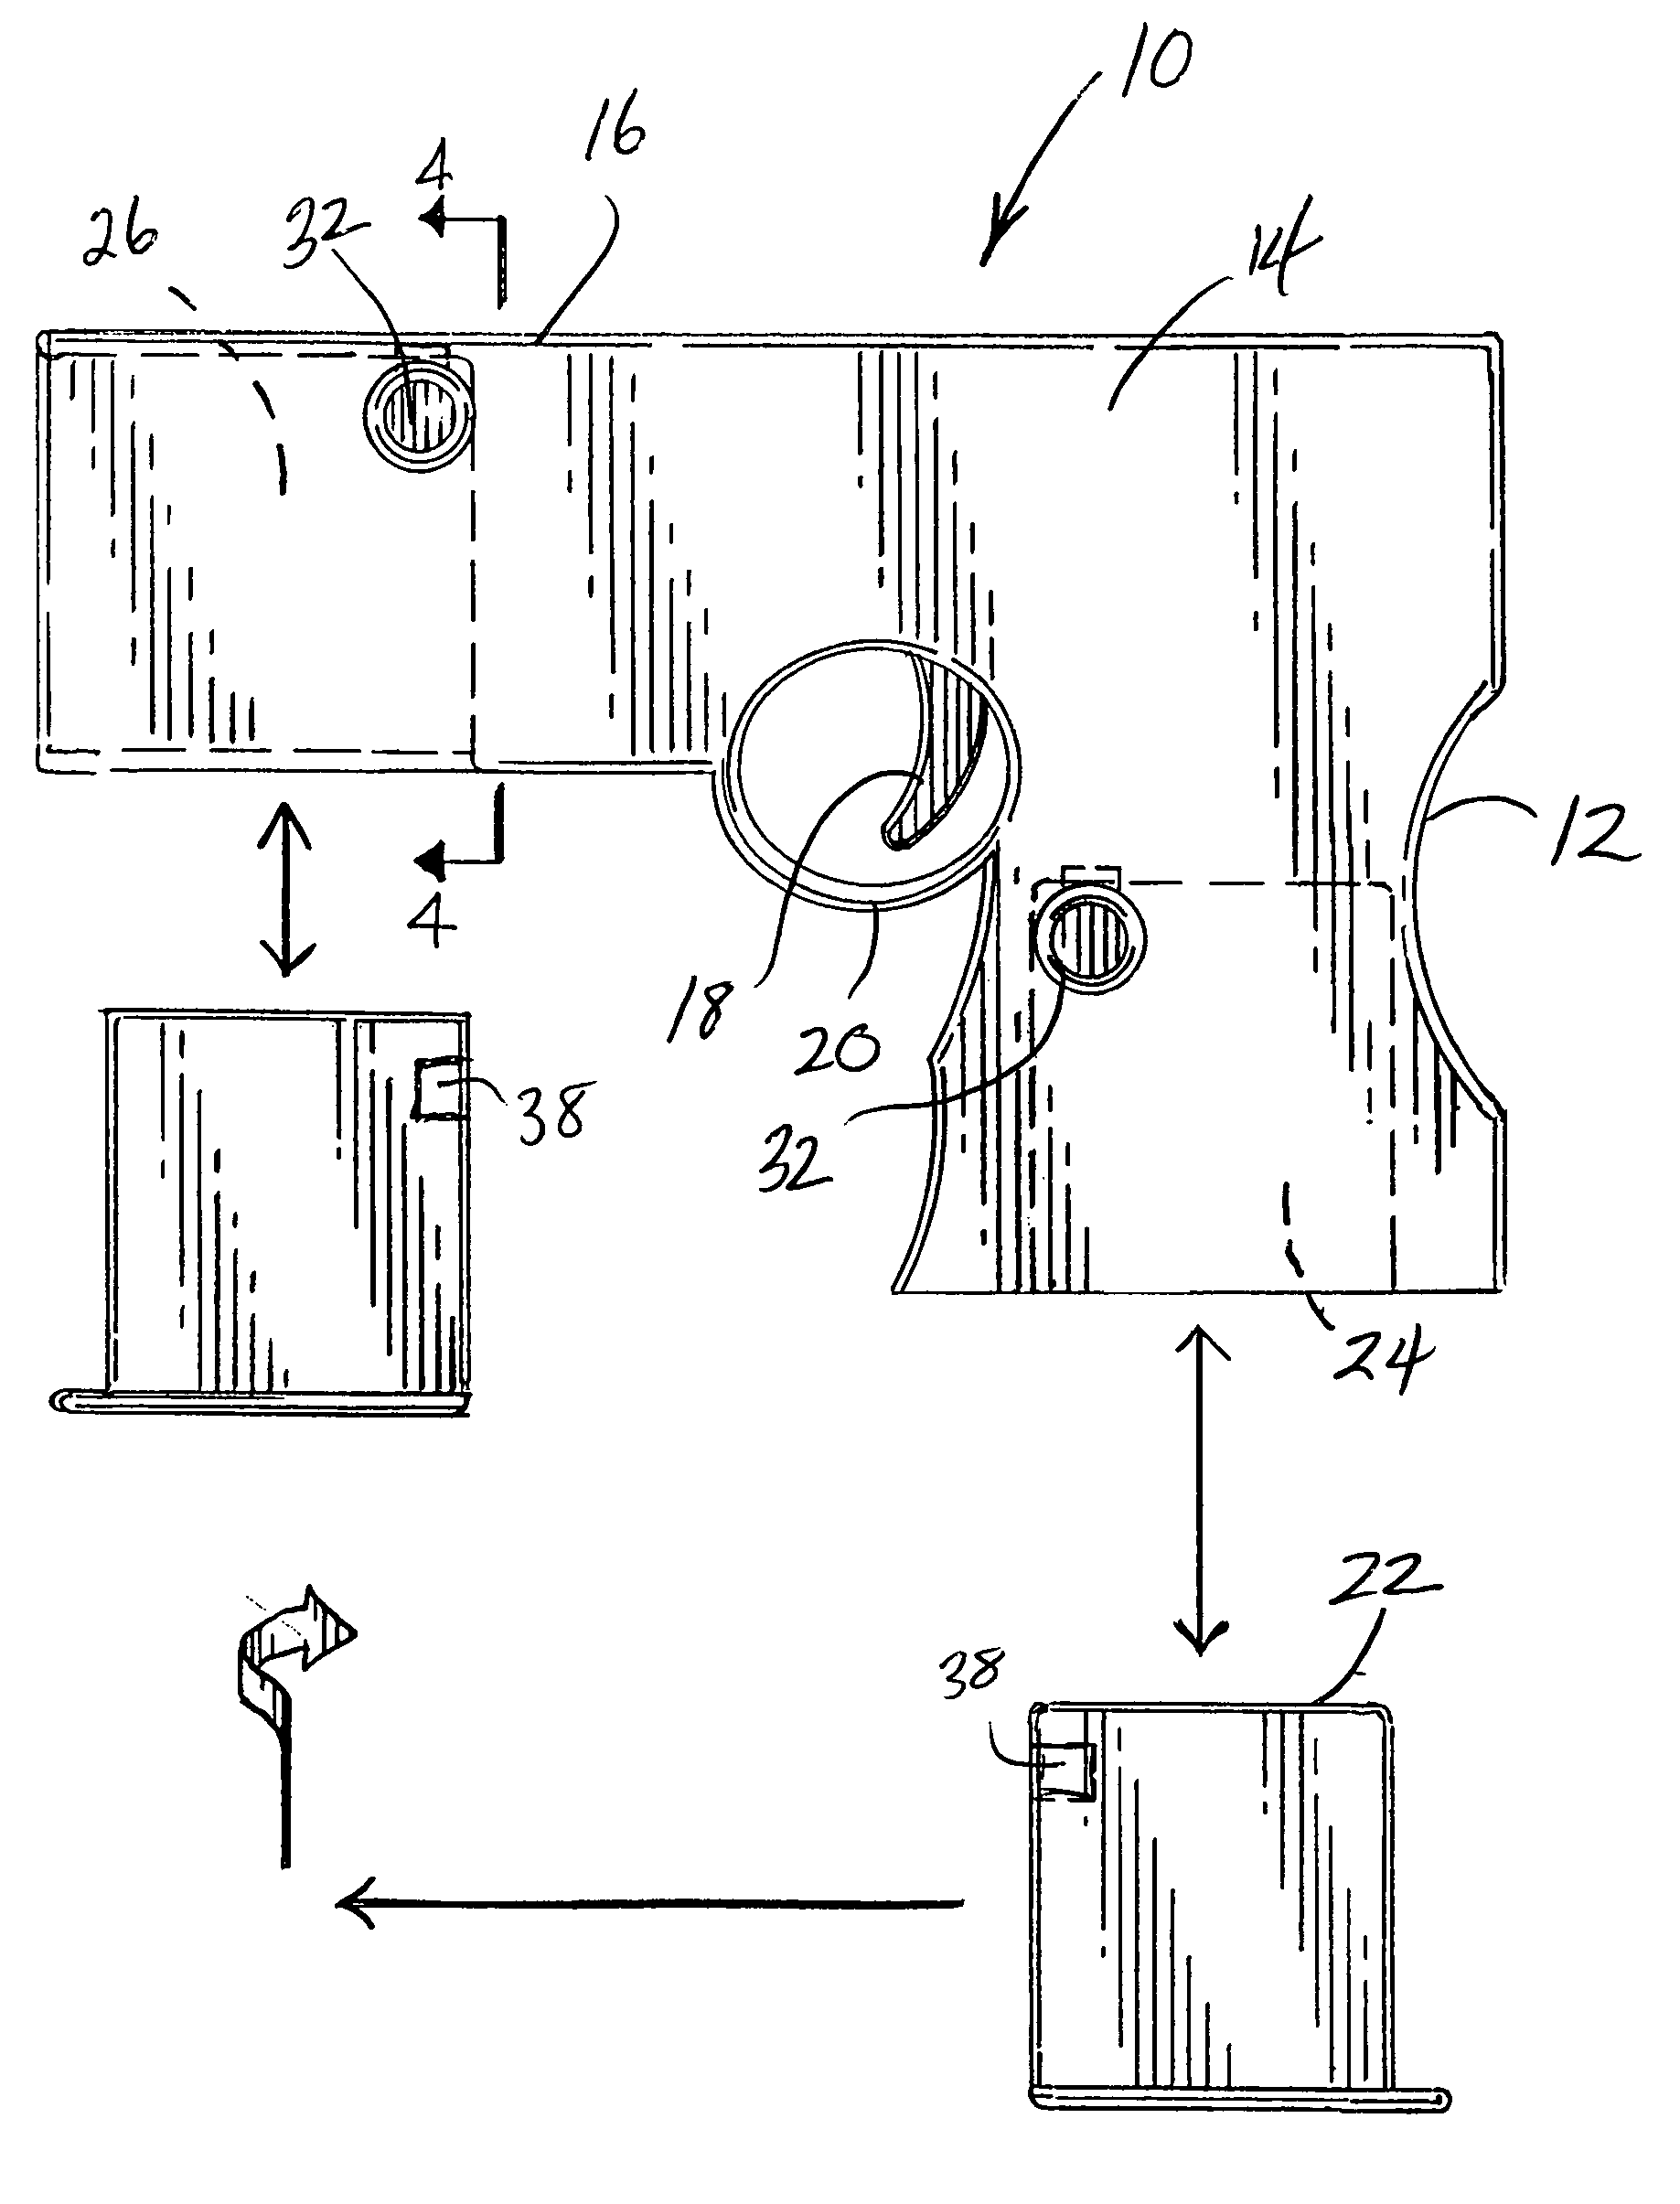 Non-lethal electrical discharge weapon having a bottom loaded cartridge